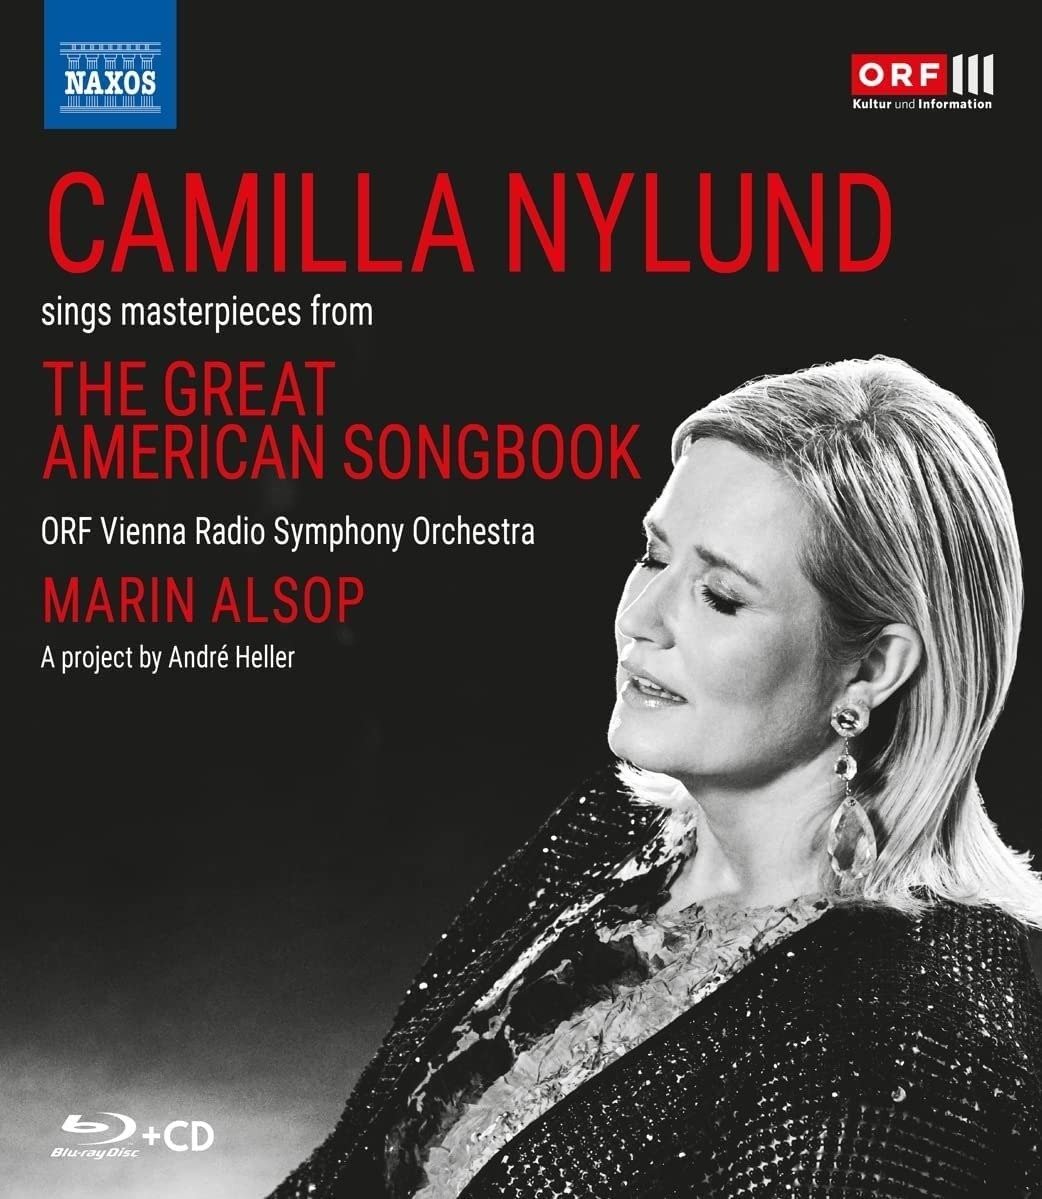 CD Shop - NYLUND, CAMILLA GREAT AMERICAN SONGBOOK